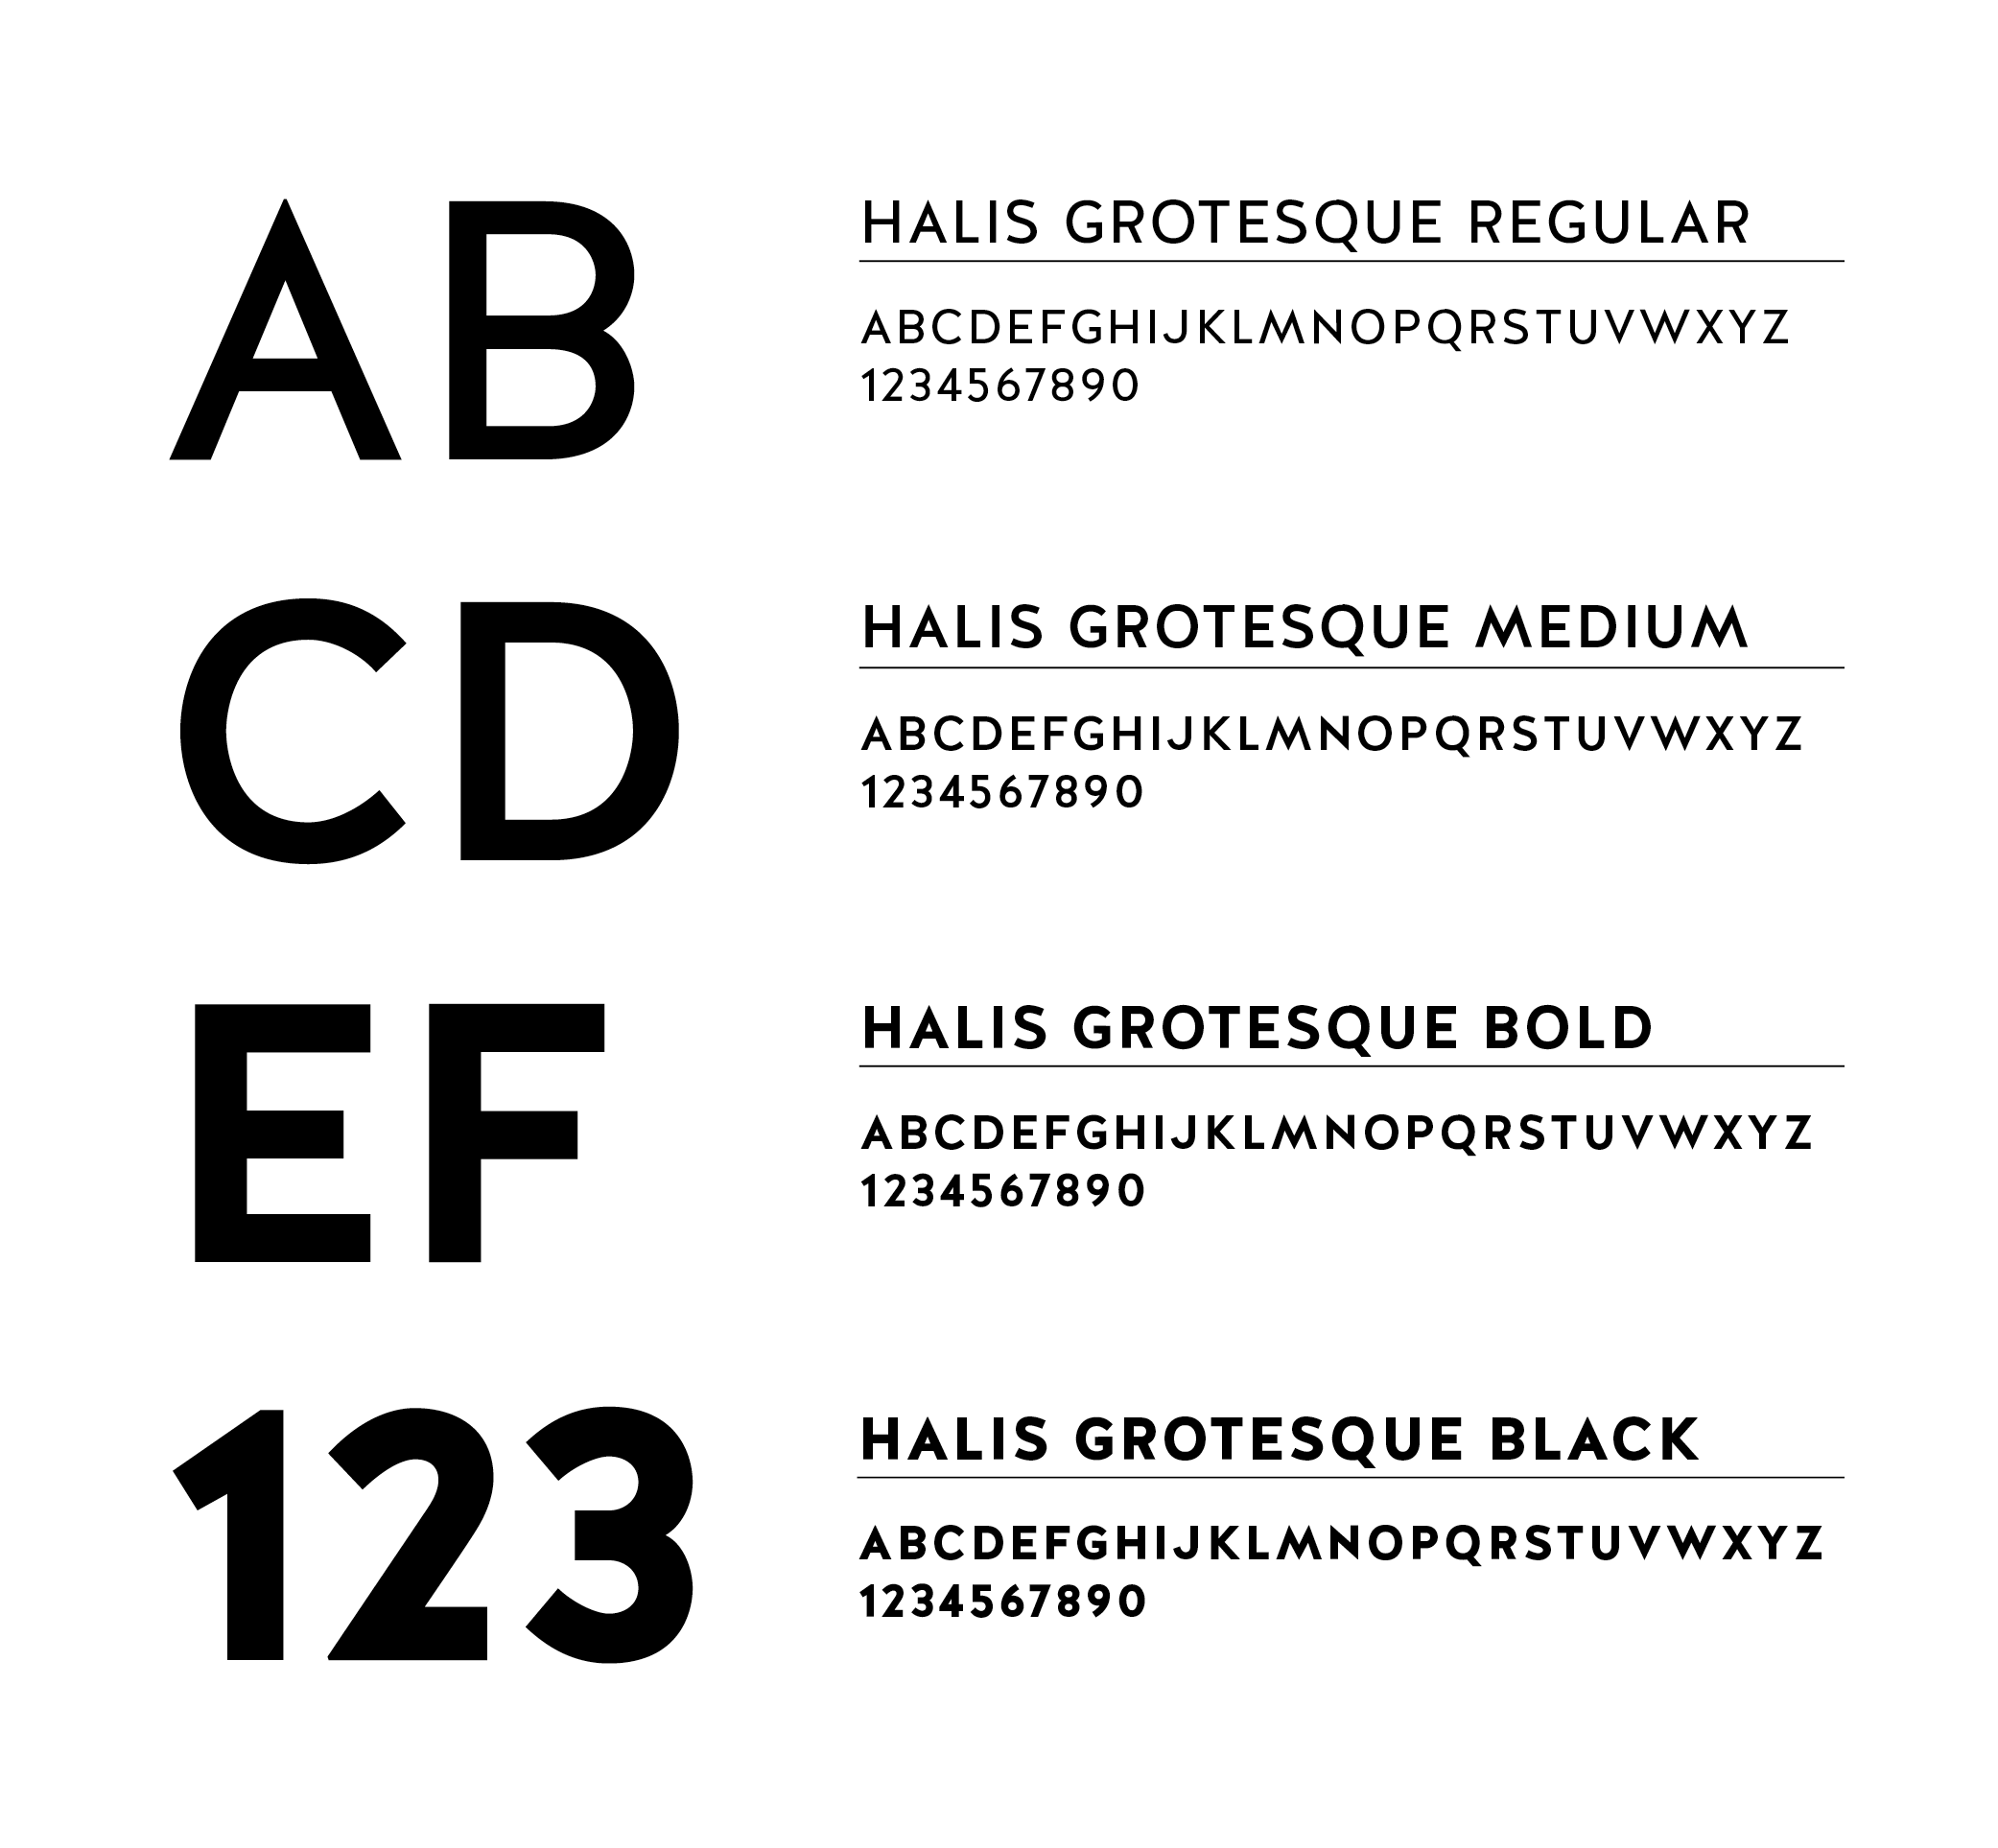 Halis Grotesque typeface weights and examples